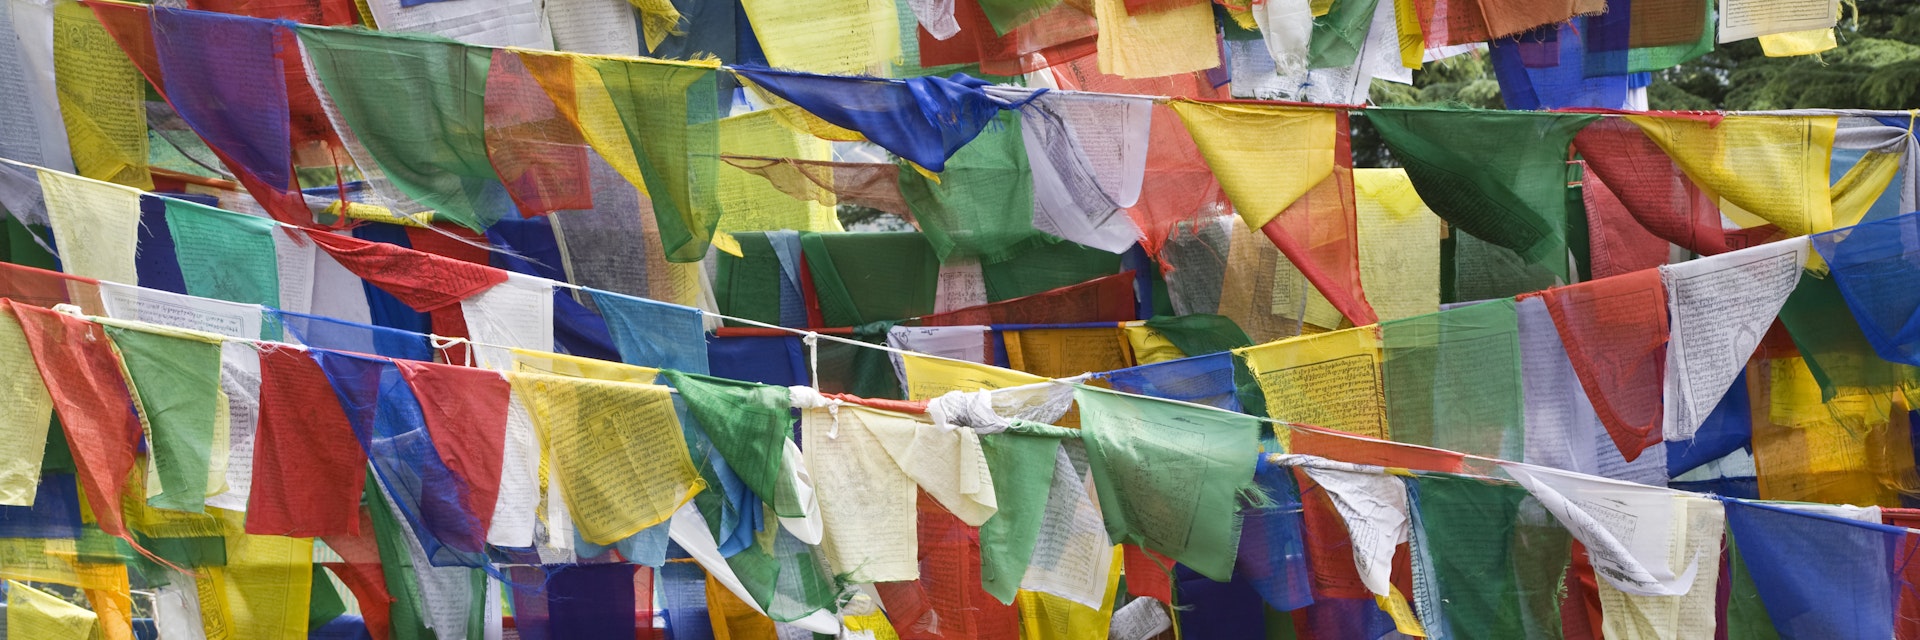 Tibetan Prayer Flags Fly On The Grounds Of The Tsuglagkhang Complex Which Is The Dalai Lamas Residence In Exile In McLeod Gang, Dharmsala, India